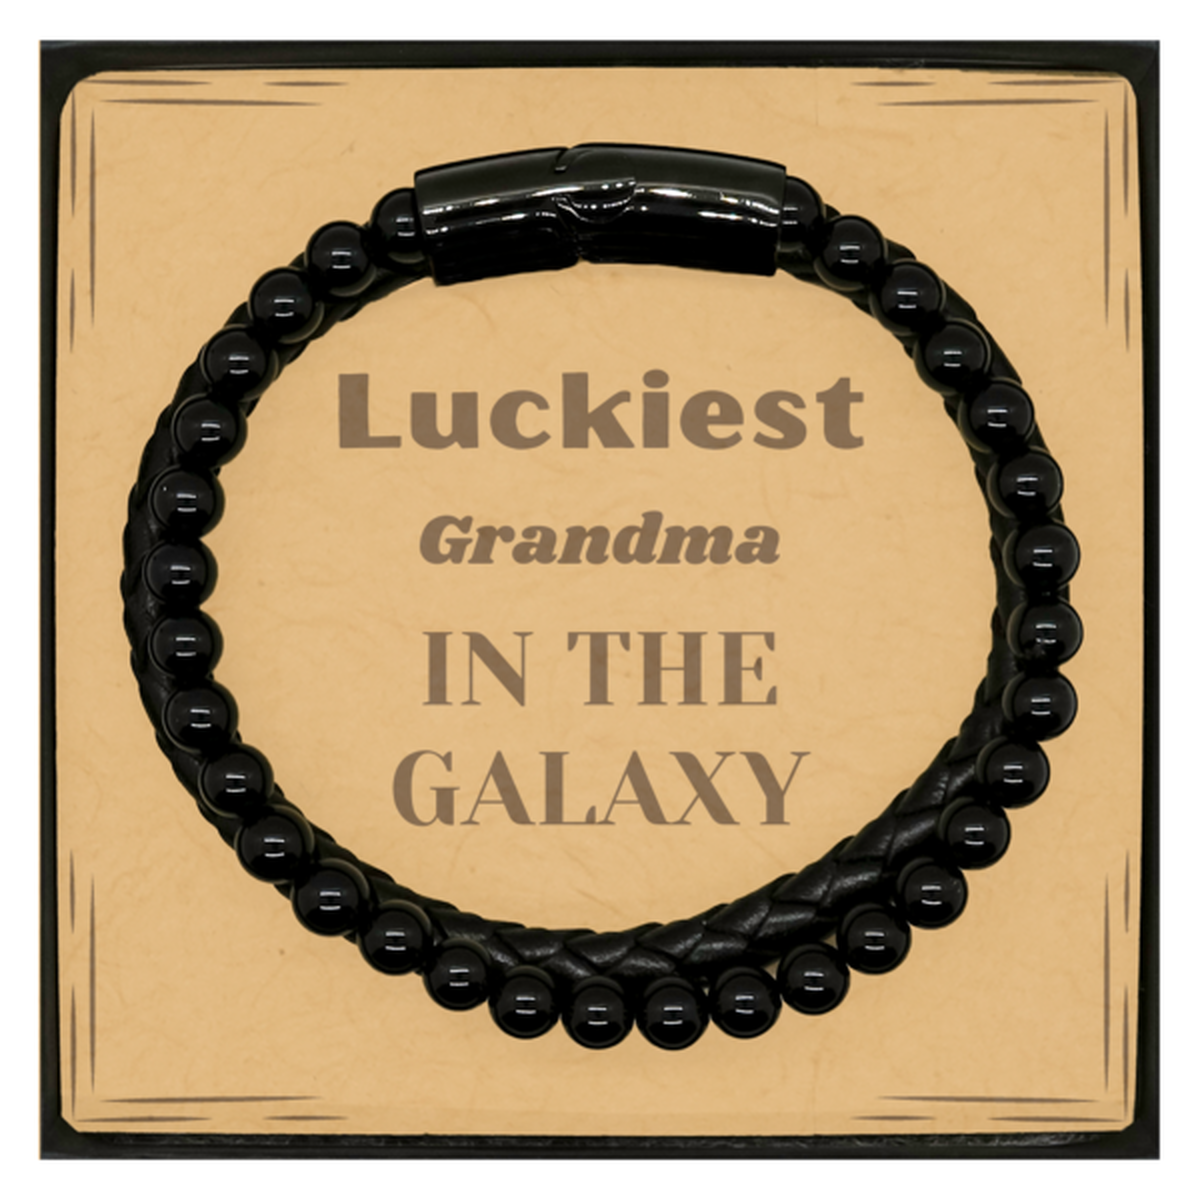 Luckiest Grandma in the Galaxy, To My Grandma Message Card Gifts, Christmas Grandma Stone Leather Bracelets Gifts, X-mas Birthday Unique Gifts For Grandma Men Women